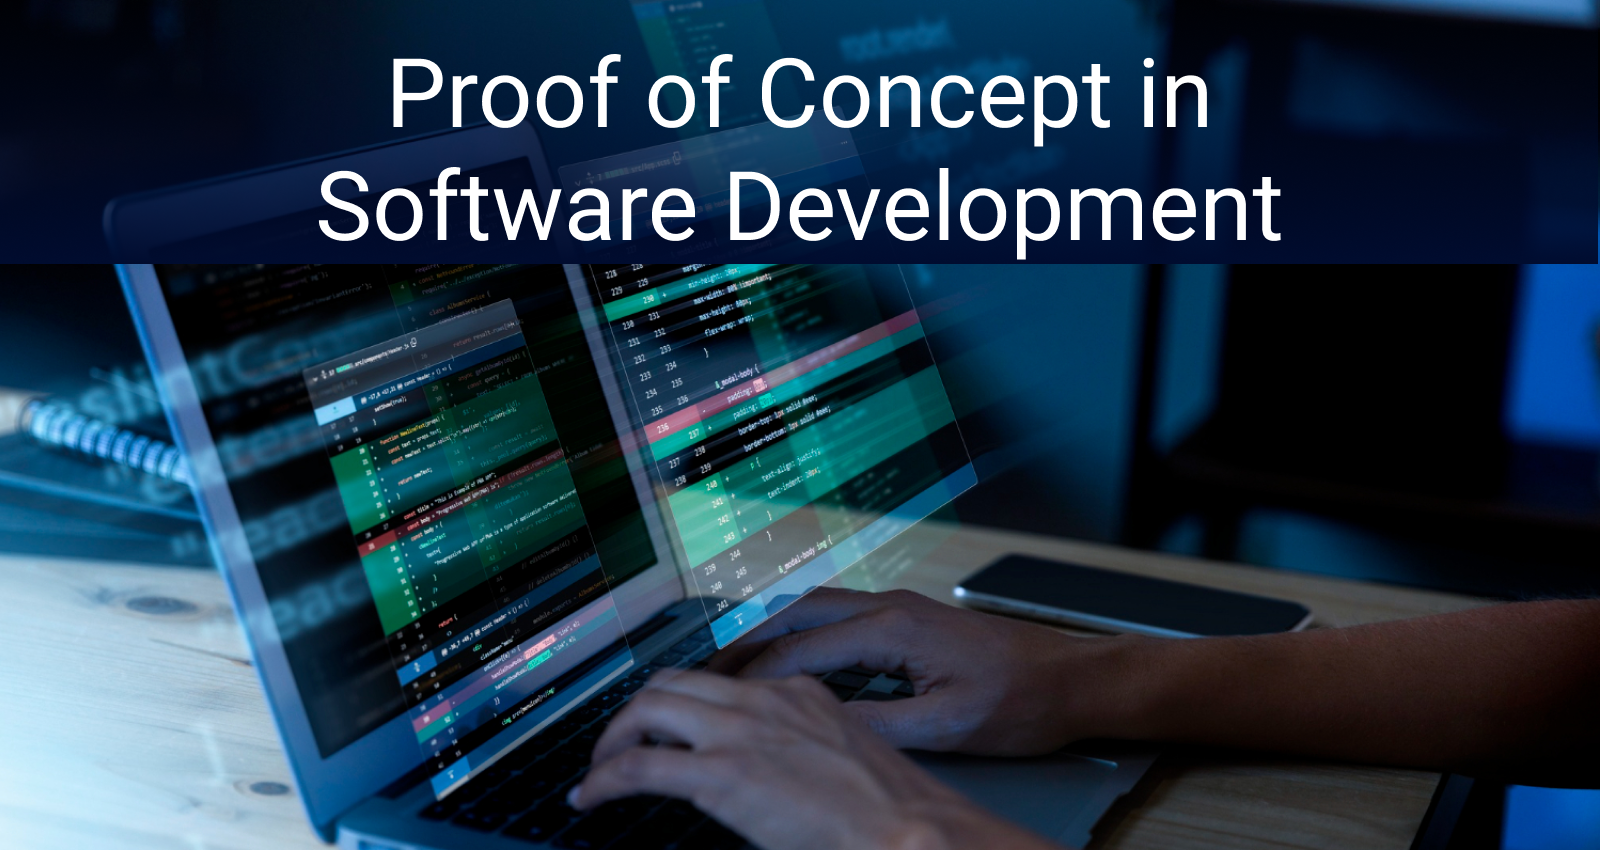 Proof of Concept, PoC, Software Development, Outsourcing Software Development, IT Services, IT Service outsourcing, Prototype, MVP.